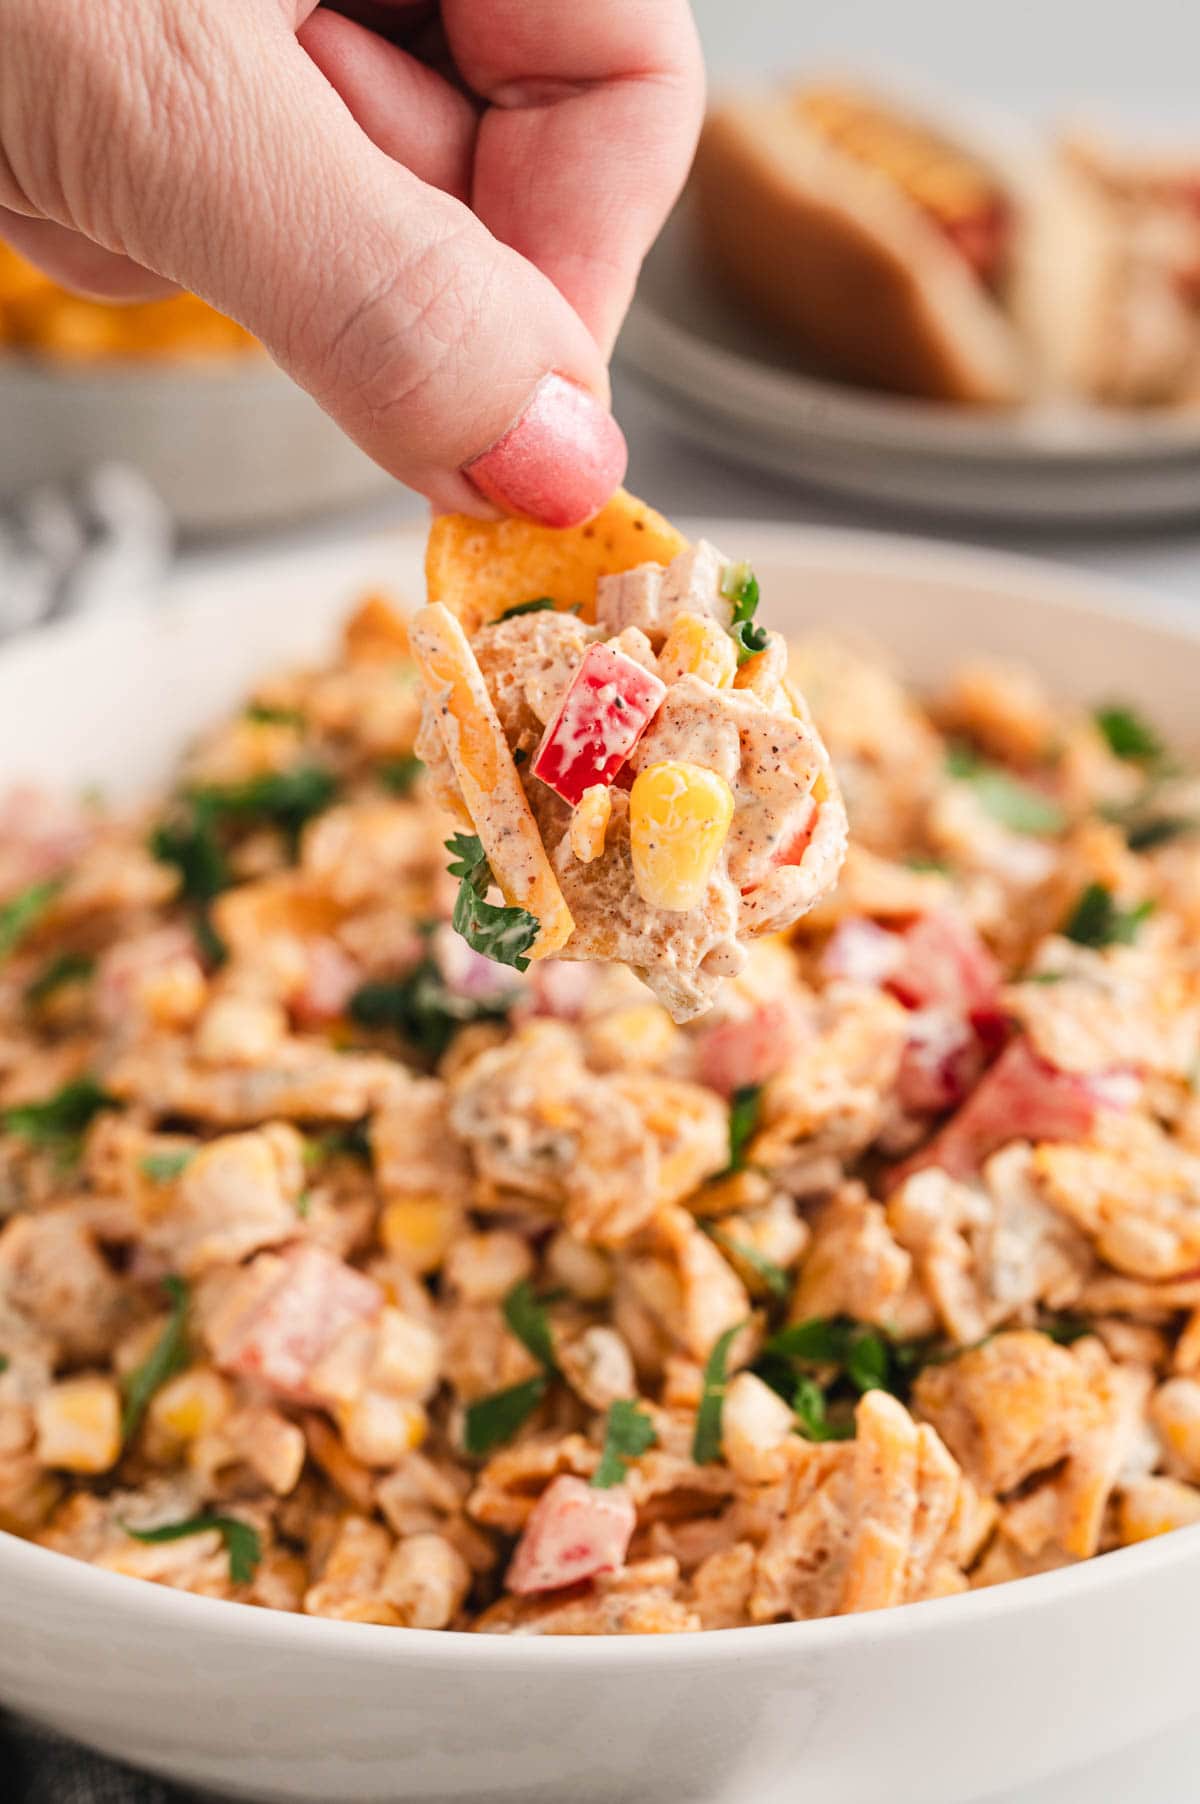 Frito corn salad with a frito scoop chip for dipping.